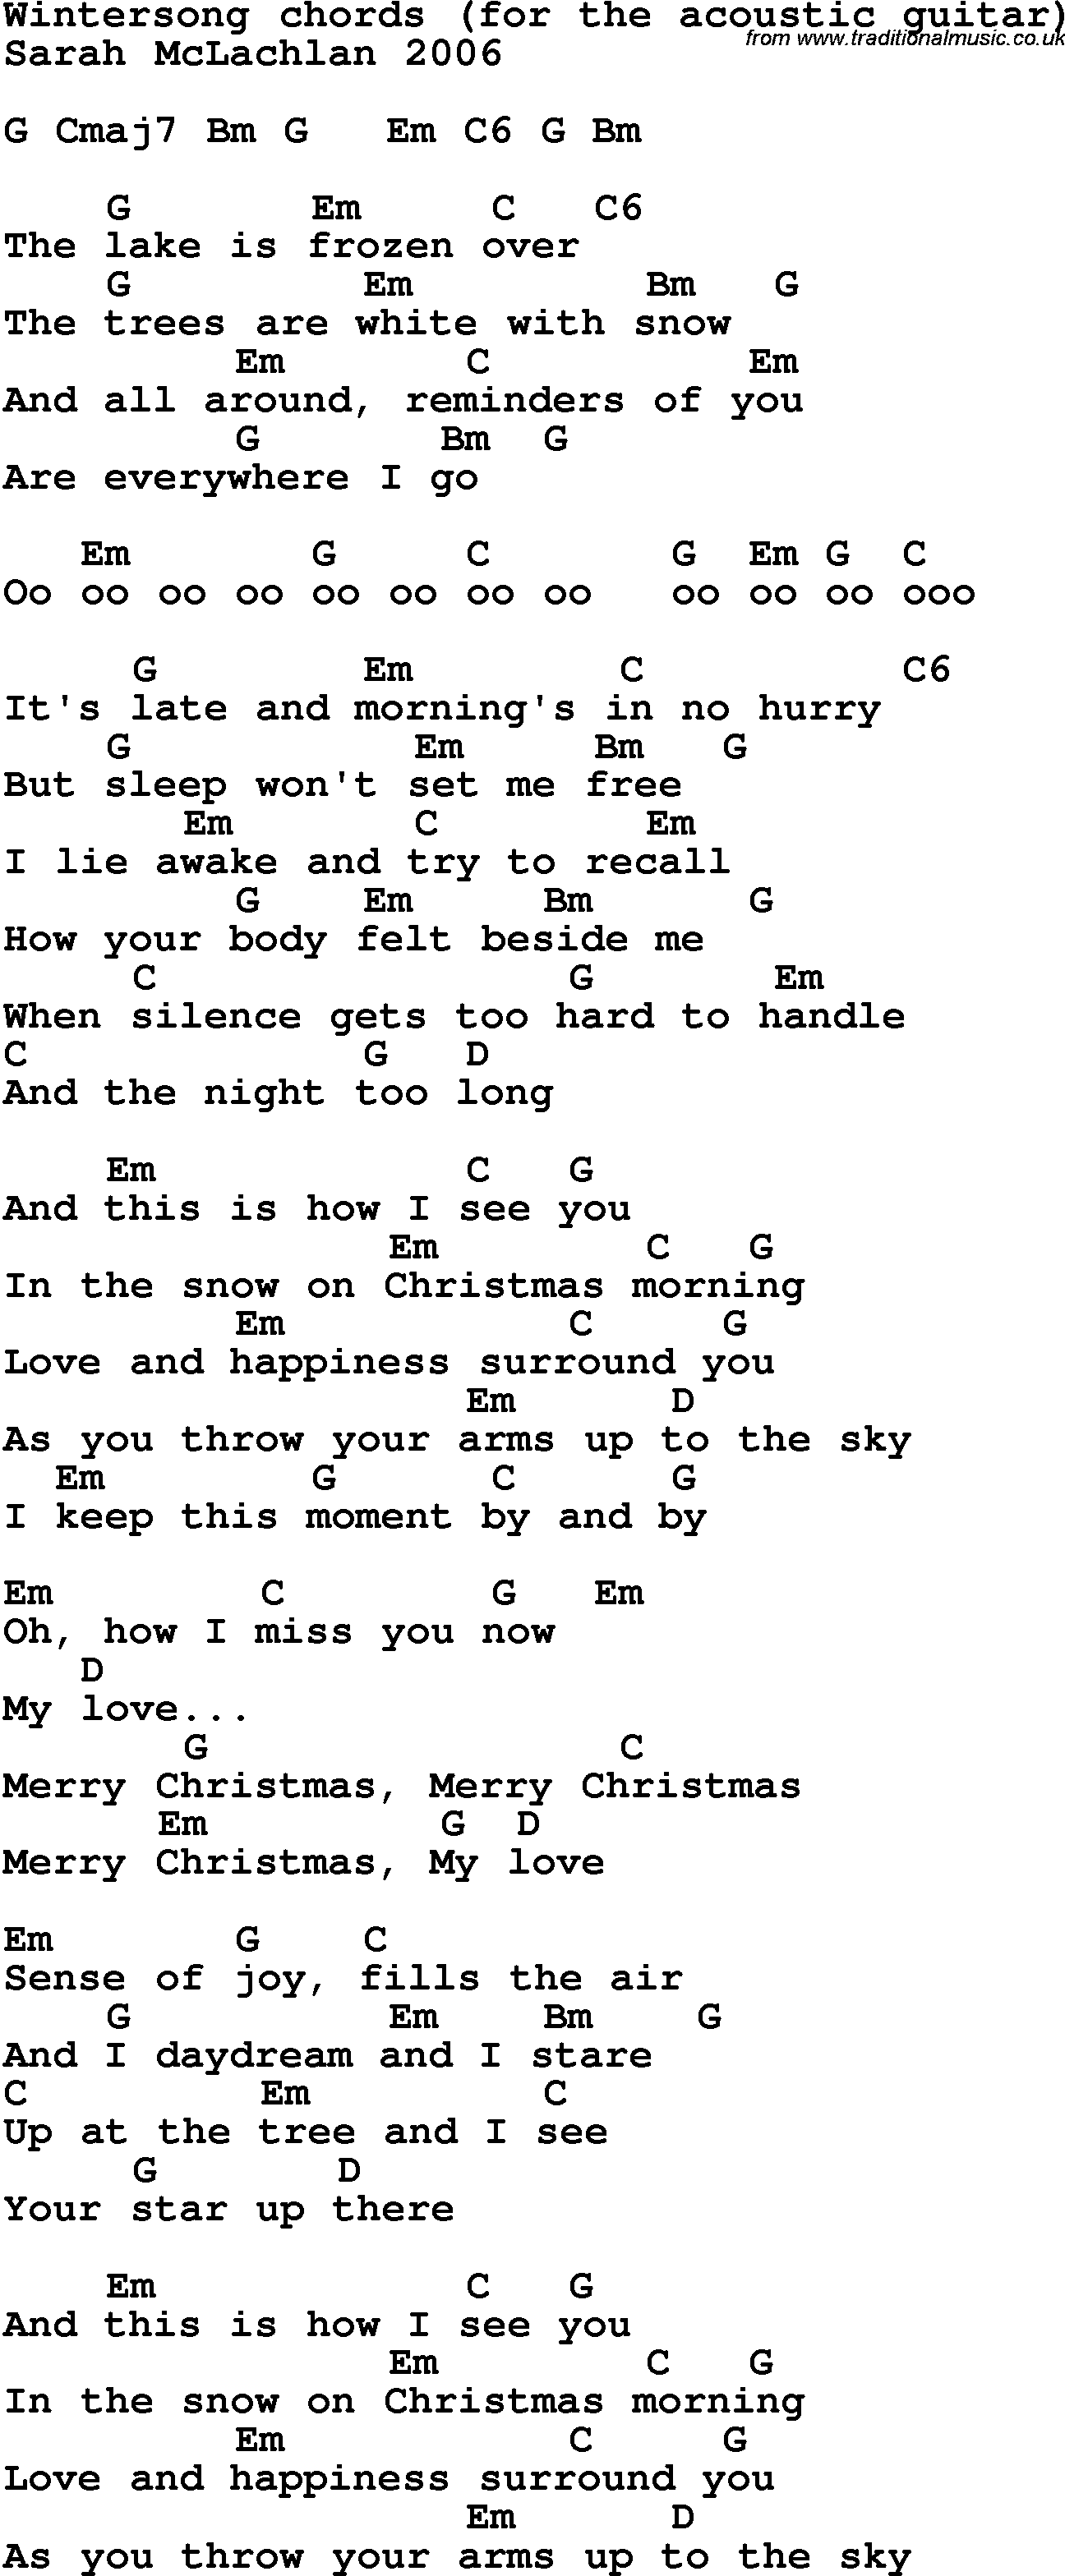 Song Lyrics with guitar chords for Wintersong